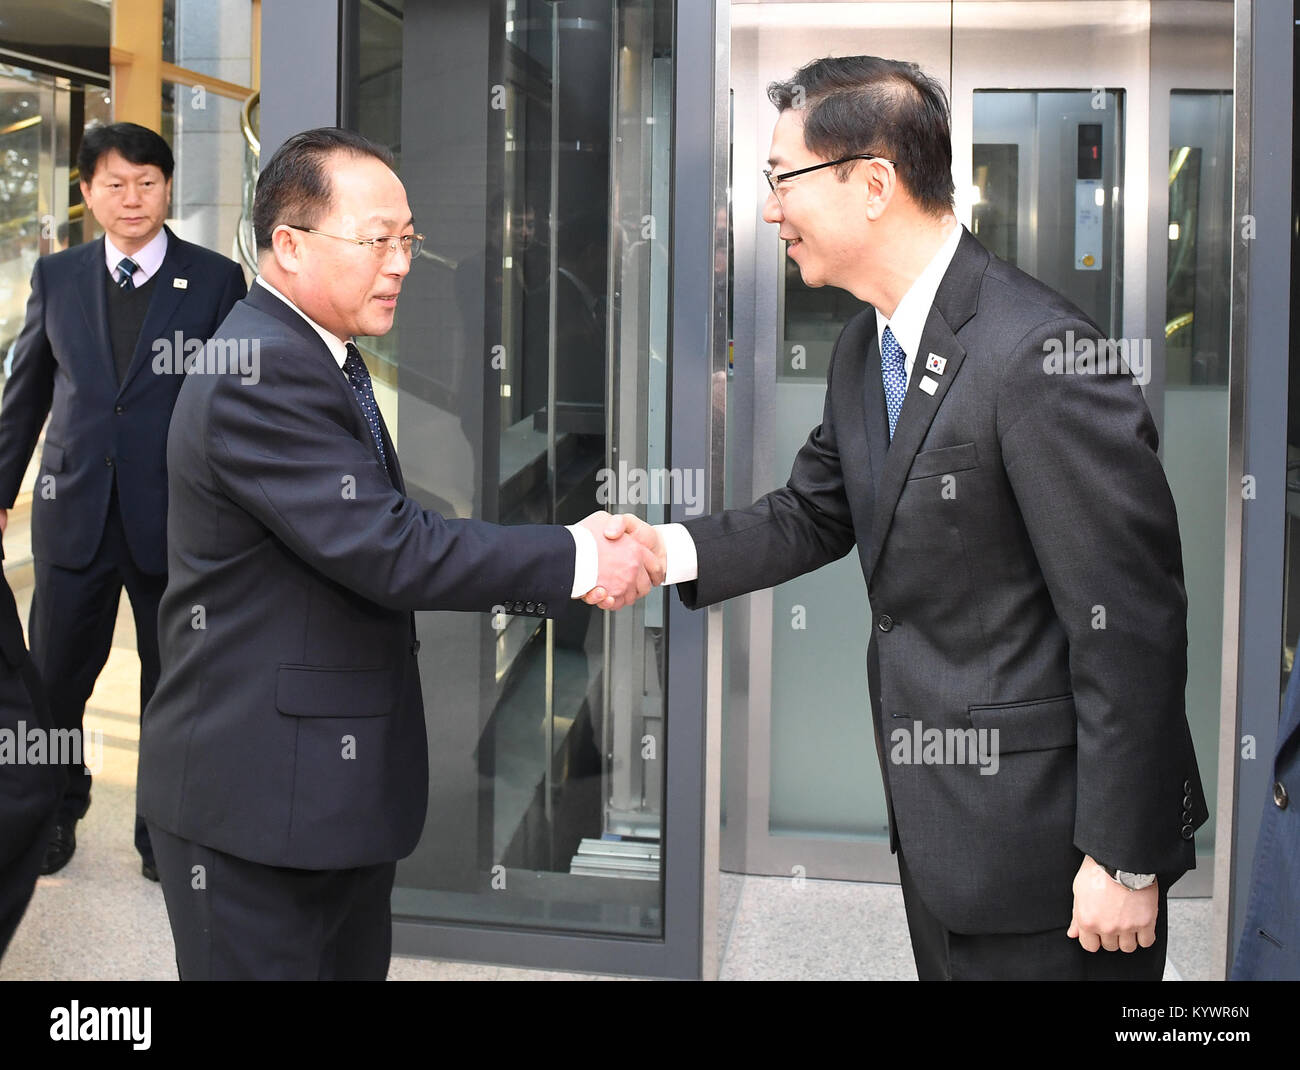 (180117) -- SEOUL, Jan. 17, 2018 (Xinhua) -- Chun Hae-sung (R), vice unification minister of South Korea, shakes hands with Jon Jong Su, vice chairman of the Committee for the Peaceful Reunification of the Fatherland of the Democratic People's Republic of Korea (DPRK), at the truce village of Panmunjom, Jan. 17, 2018. Working-level talks between South Korea and DPRK were underway Wednesday at the truce village of Panmunjom to discuss the DPRK's dispatch of athletes to the South Korea-hosted Winter Olympics, Seoul's Unification Ministry said. (Xinhua/South Korean Unification Ministry) (psw) Stock Photo